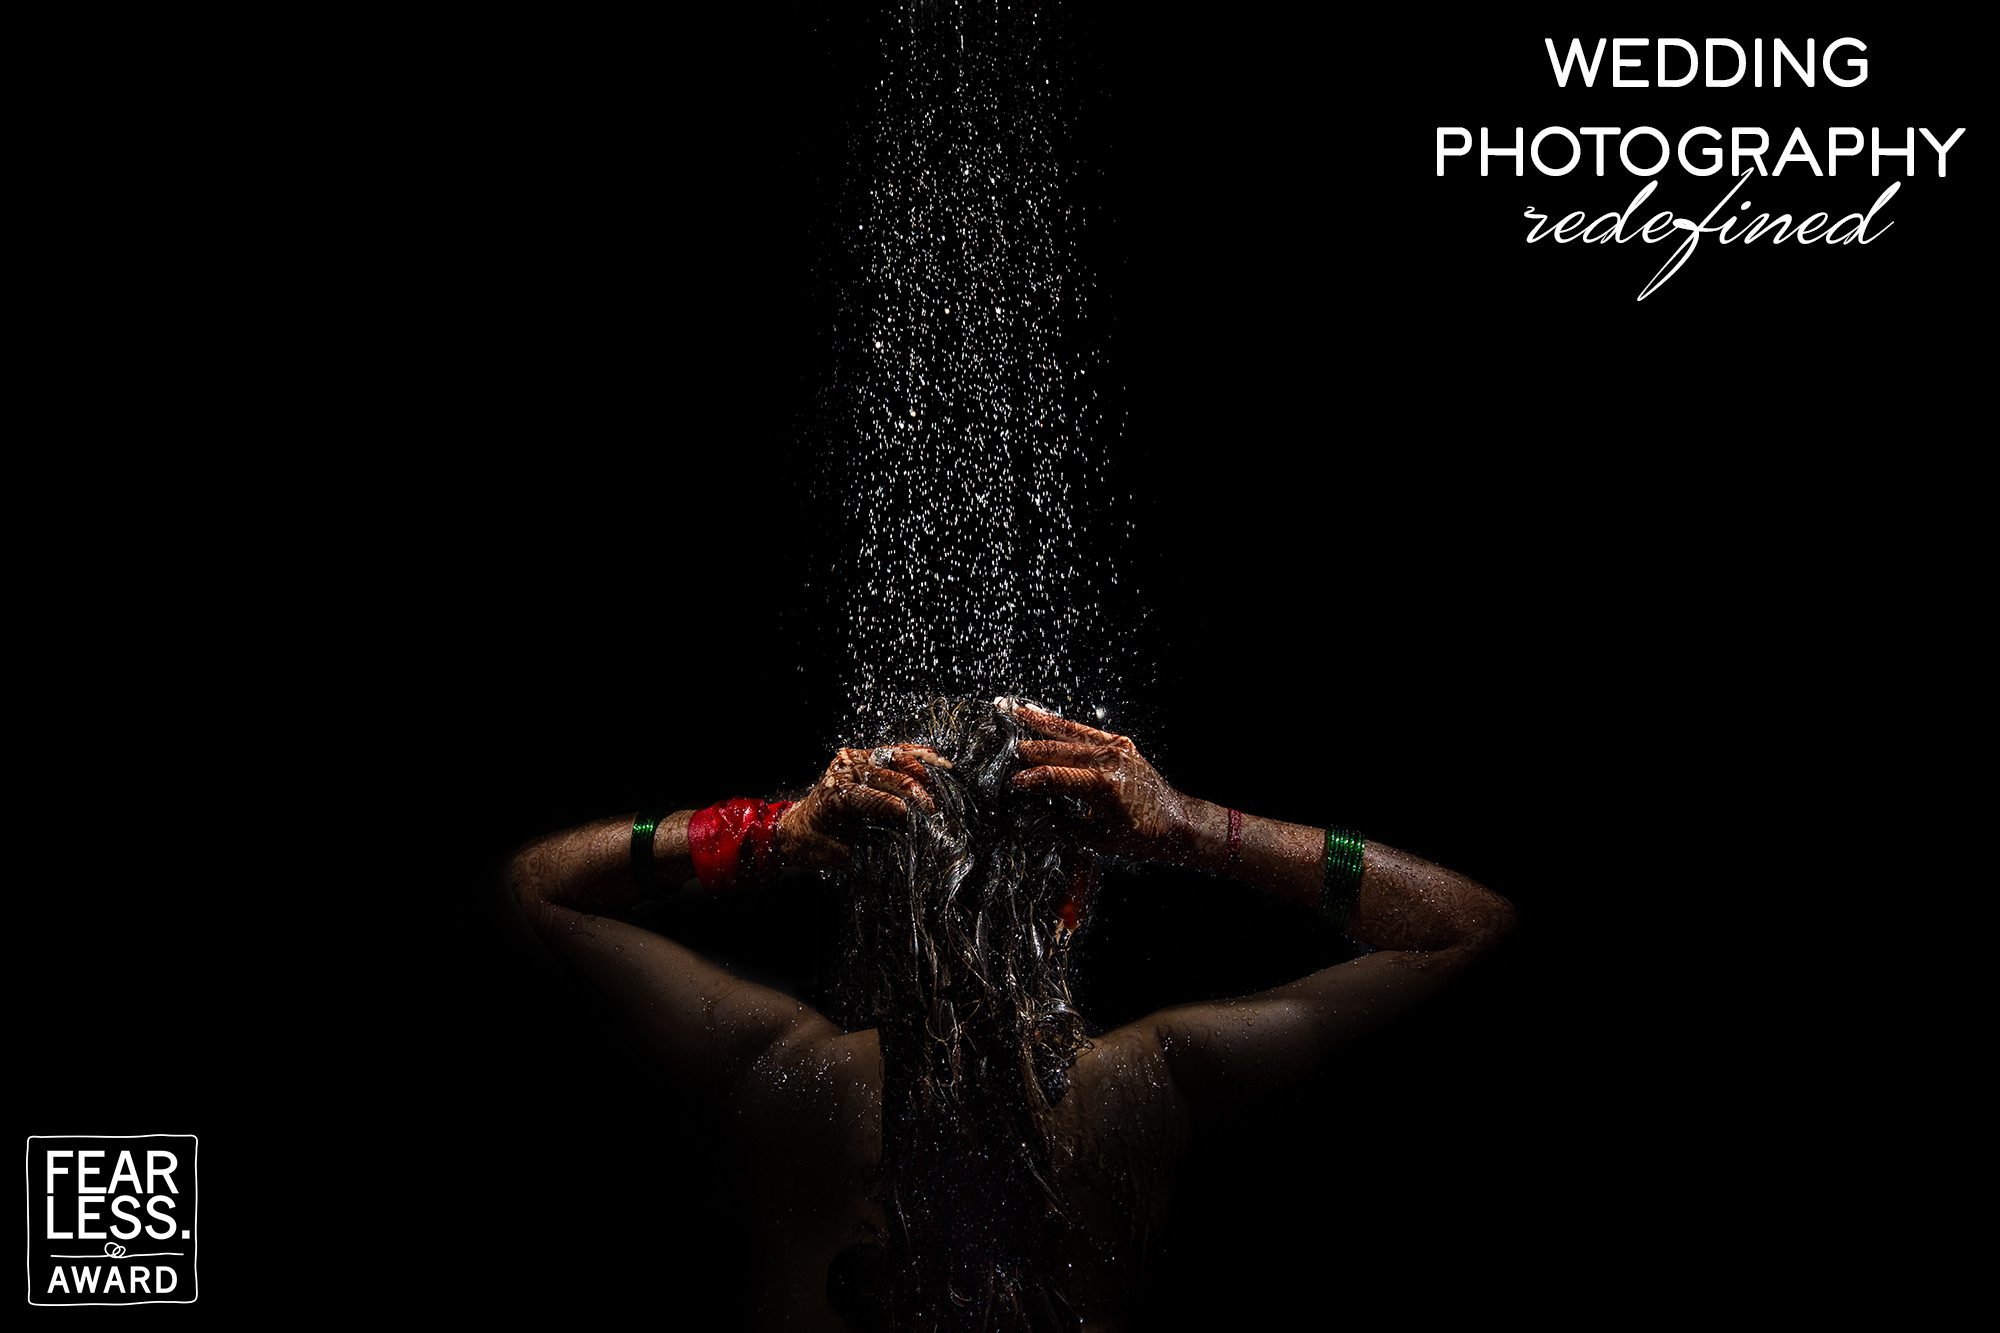 wedding photography redefined bride taking a shower